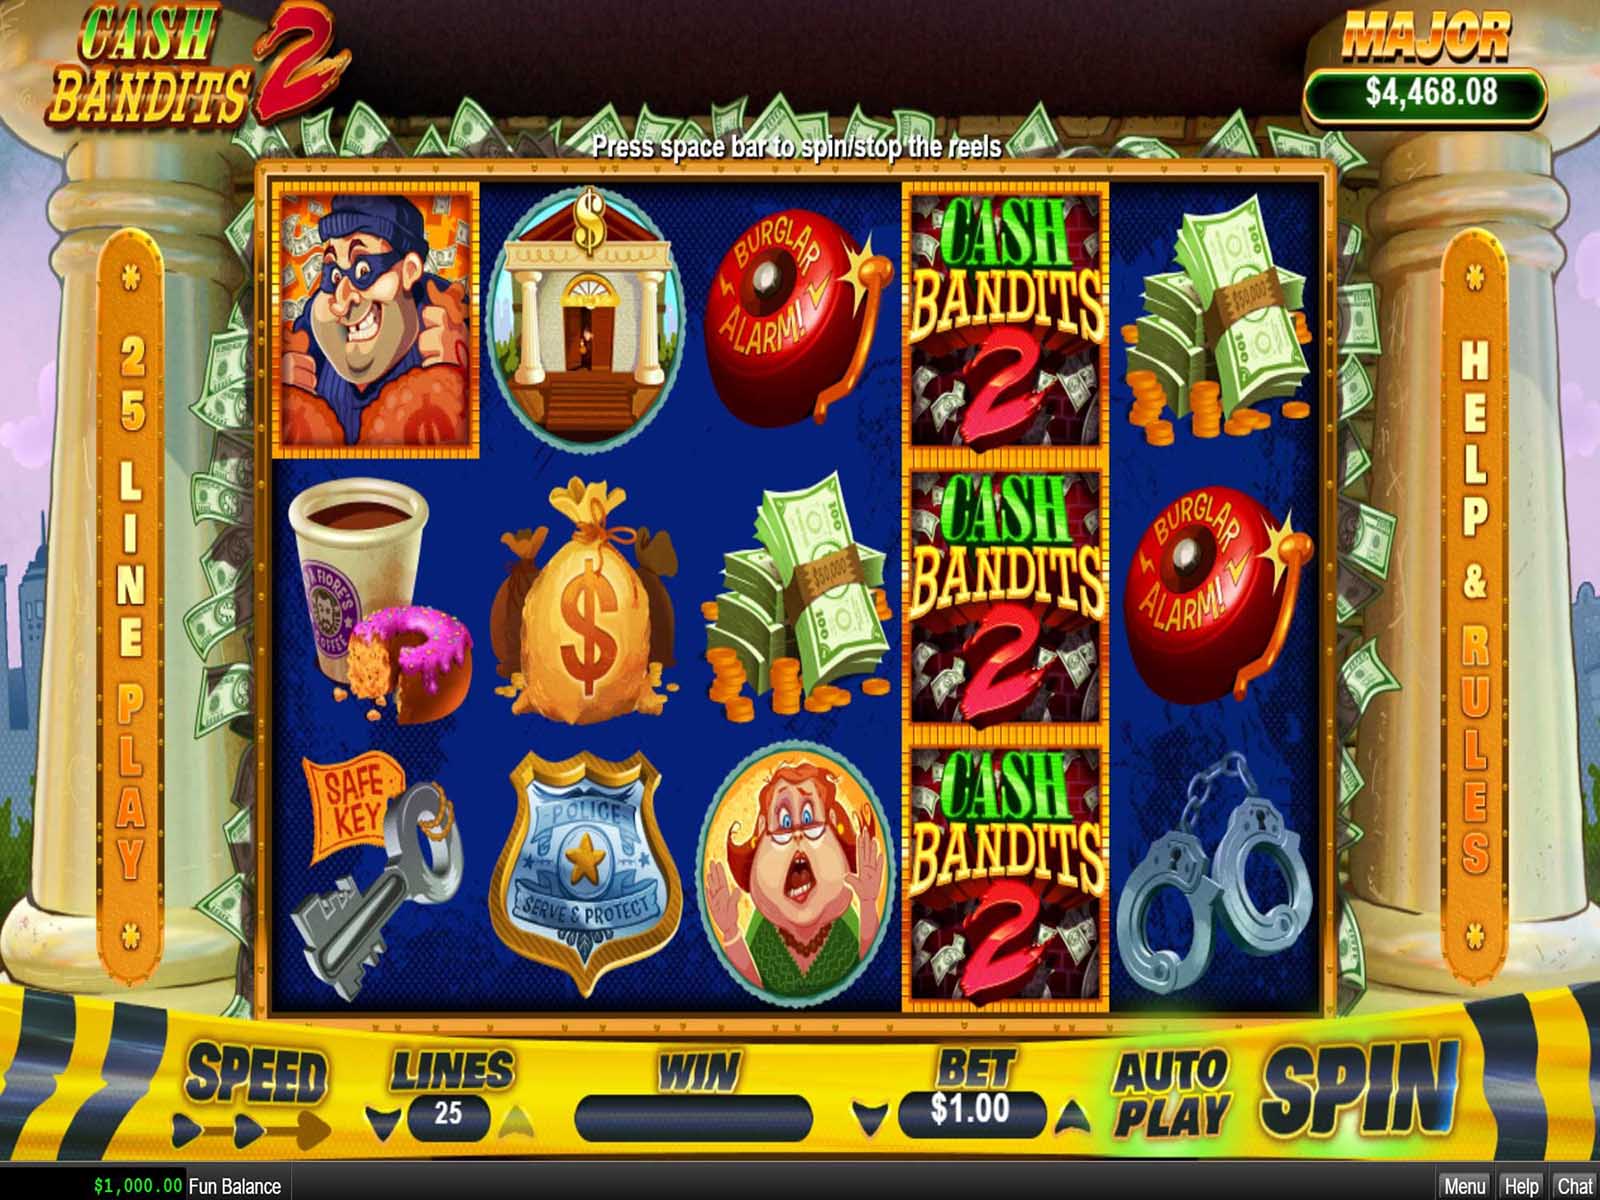 Play slots for real cash